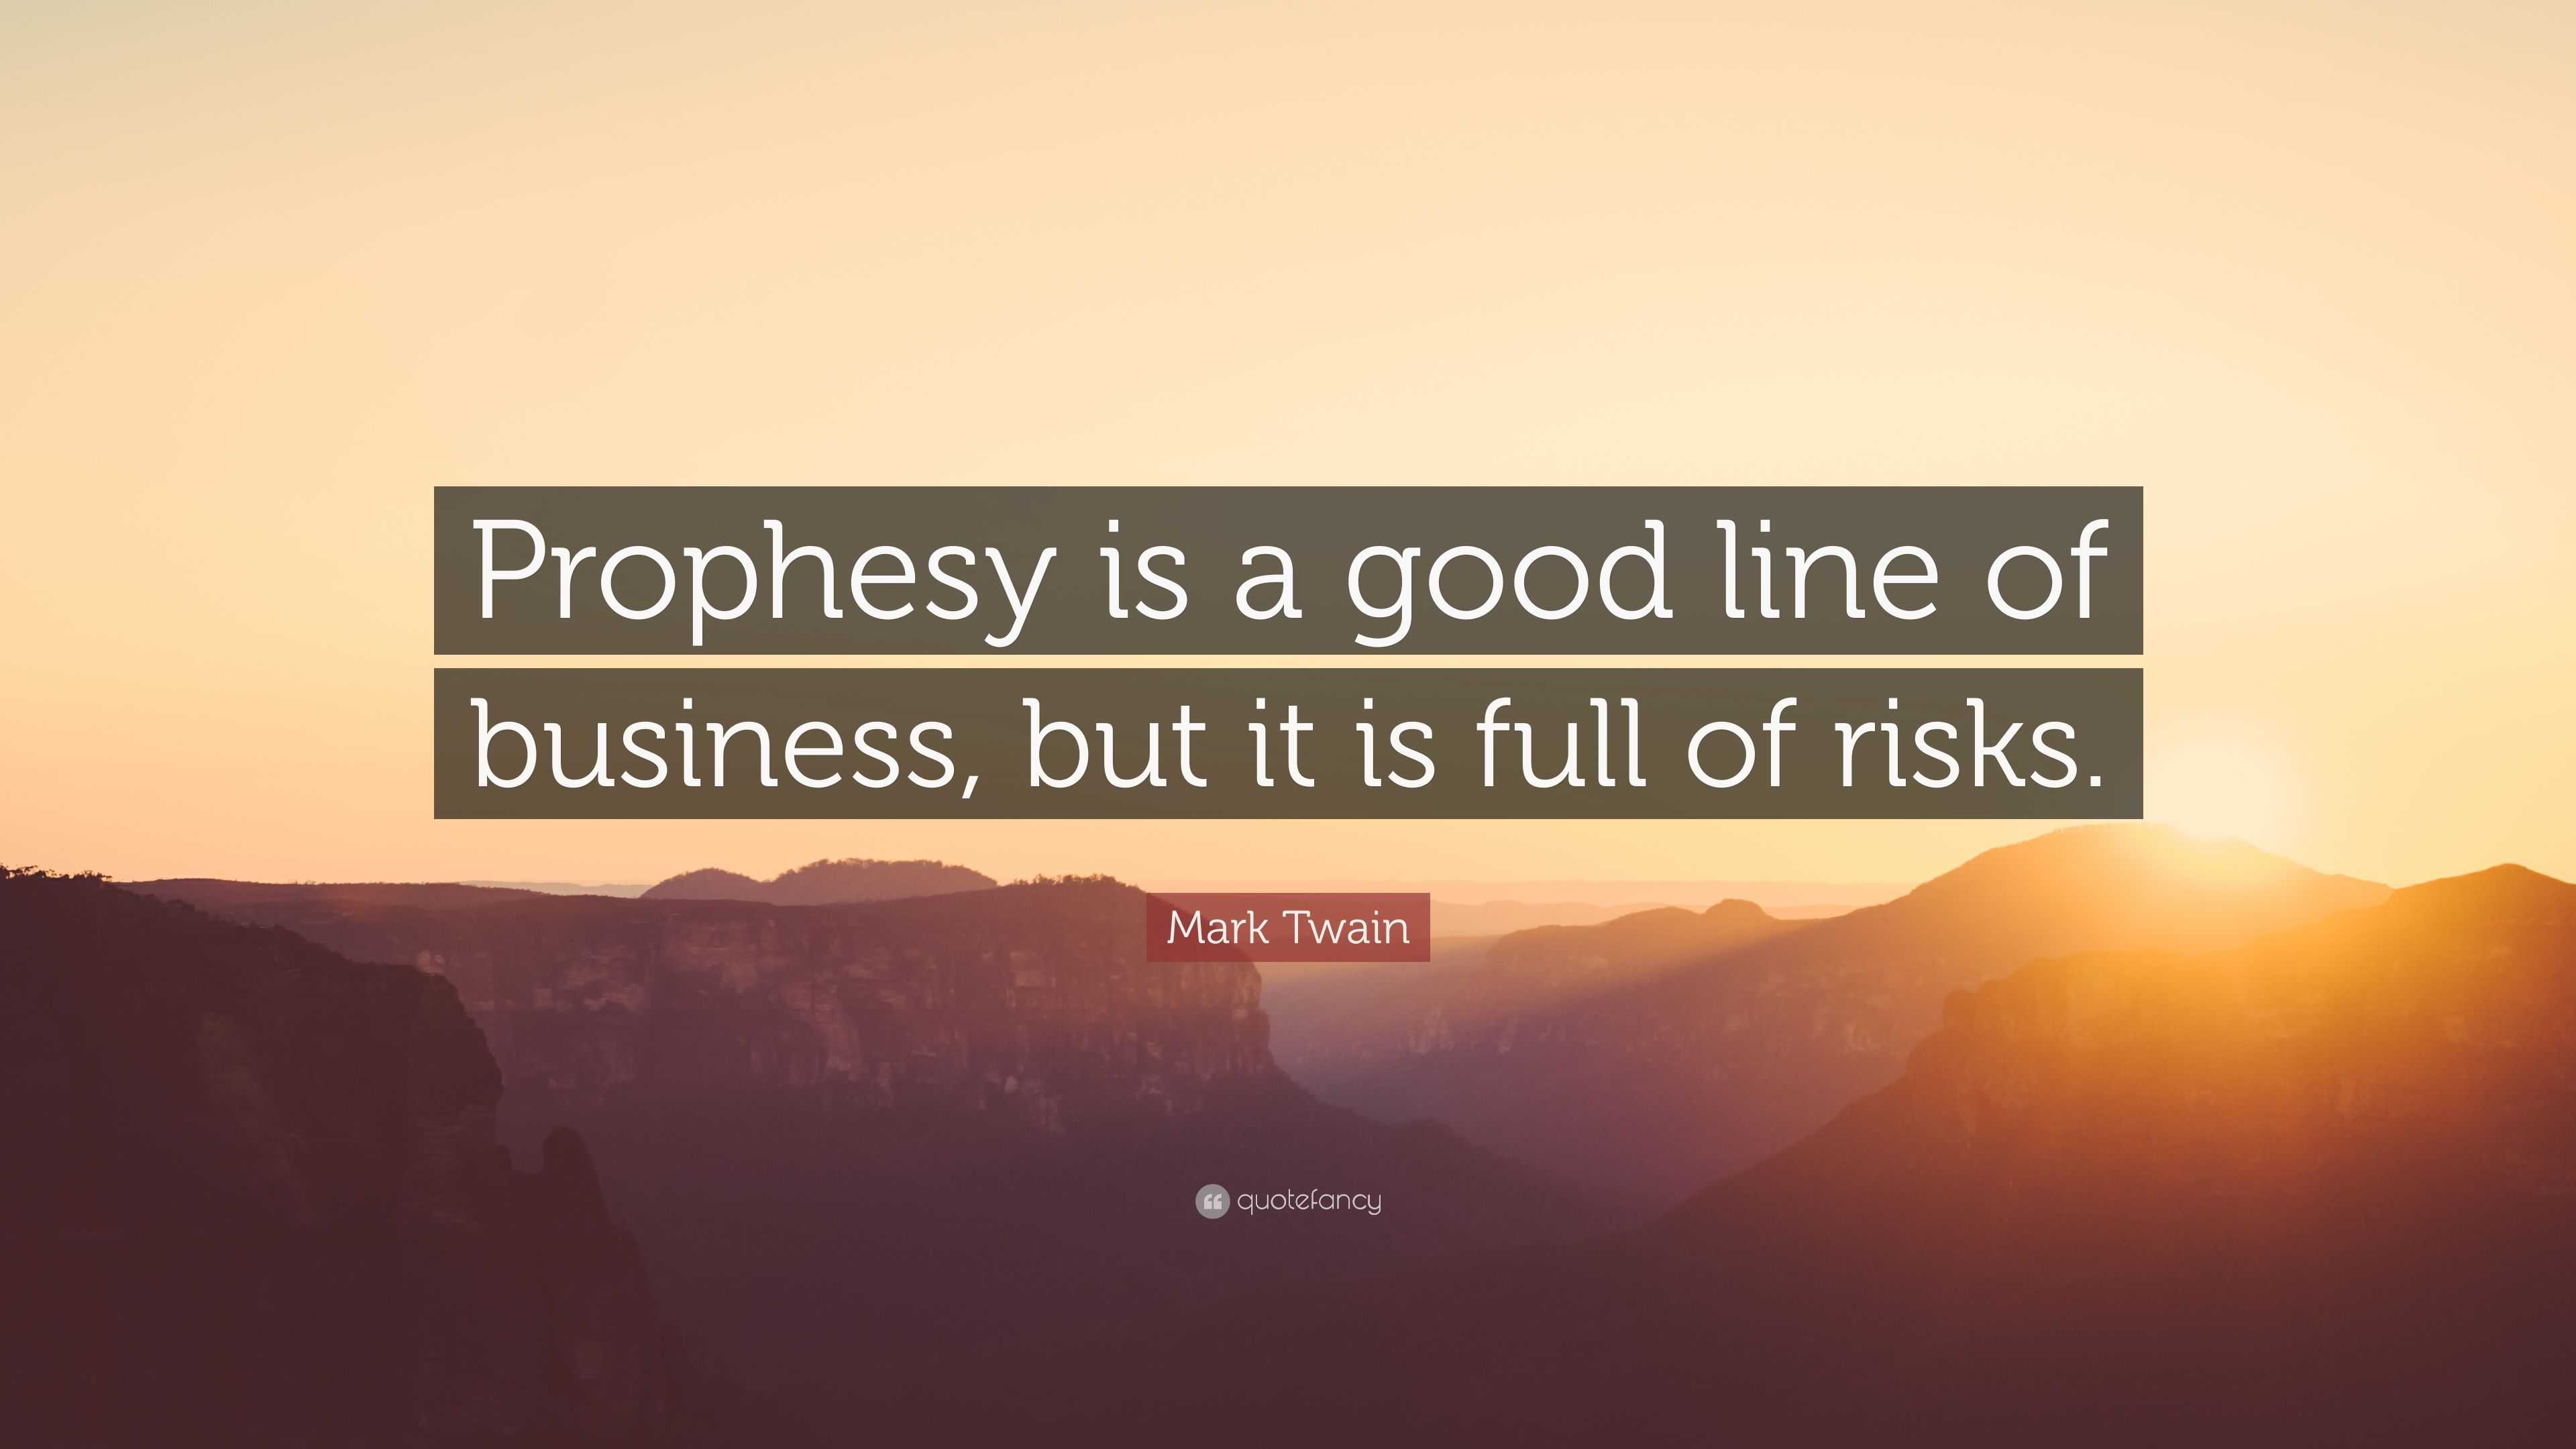 Mark Twain Quote: “Prophesy is a good line of business, but it is full ...